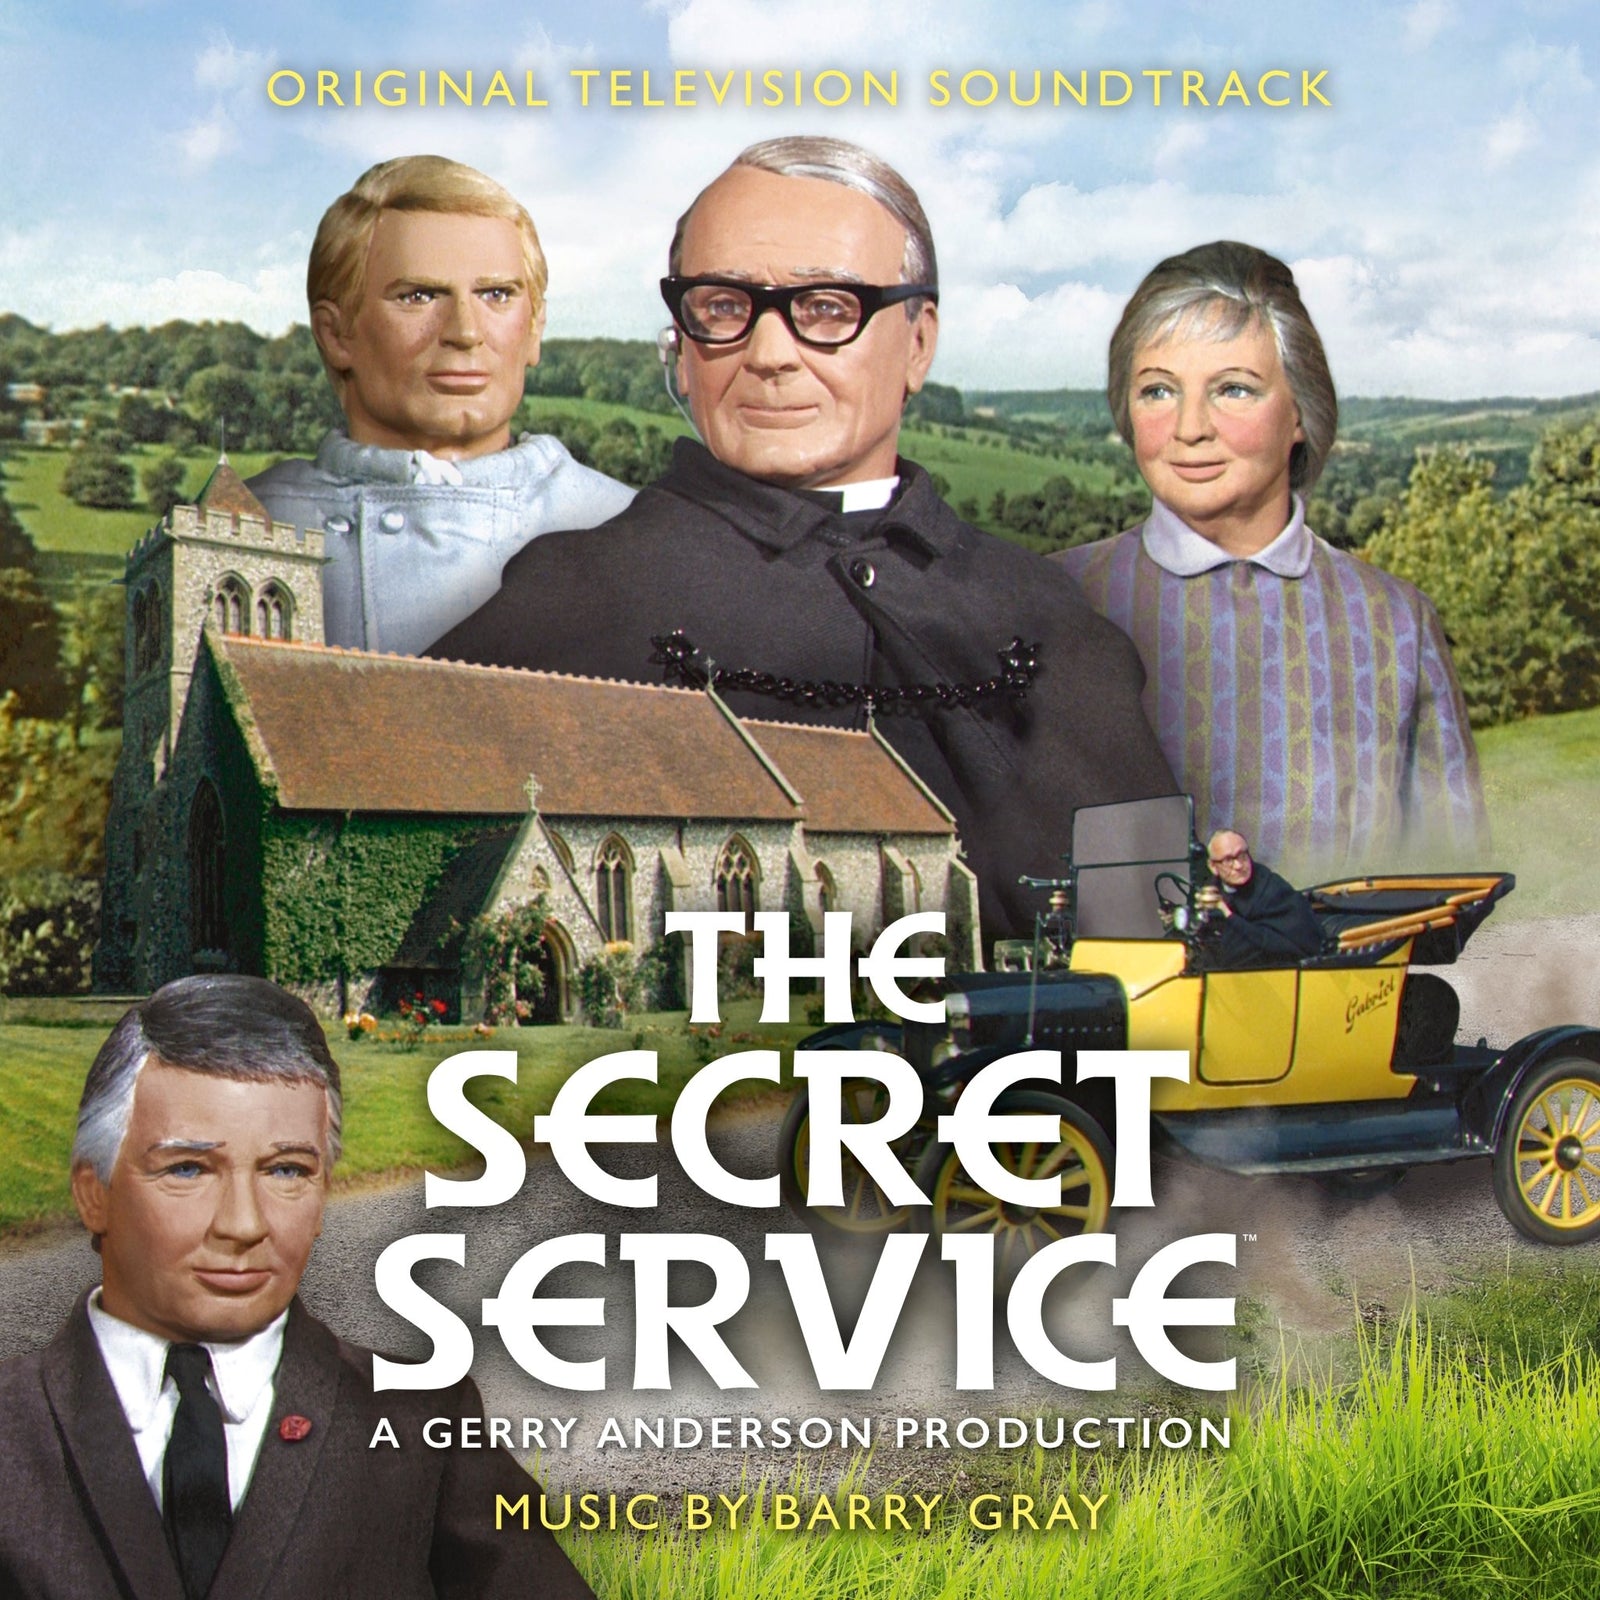 The Secret Service DVD, gifts and merchandise